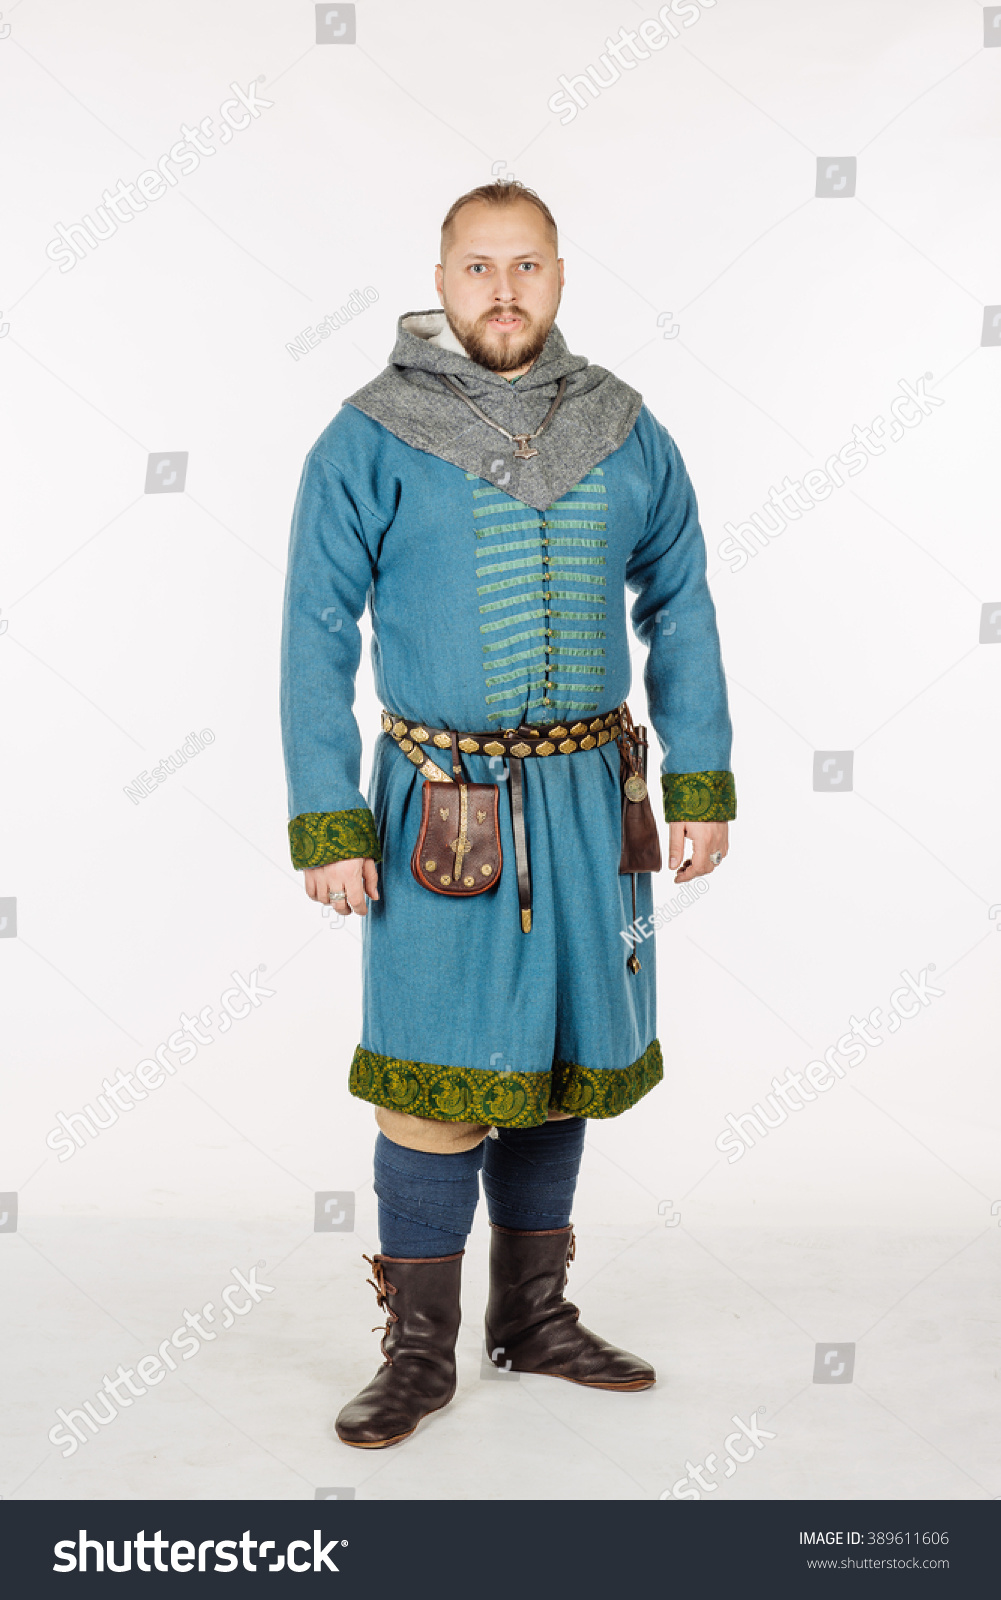 Slavic Soldier Dressed Historical Costume Image Stock Photo (Edit Now ...